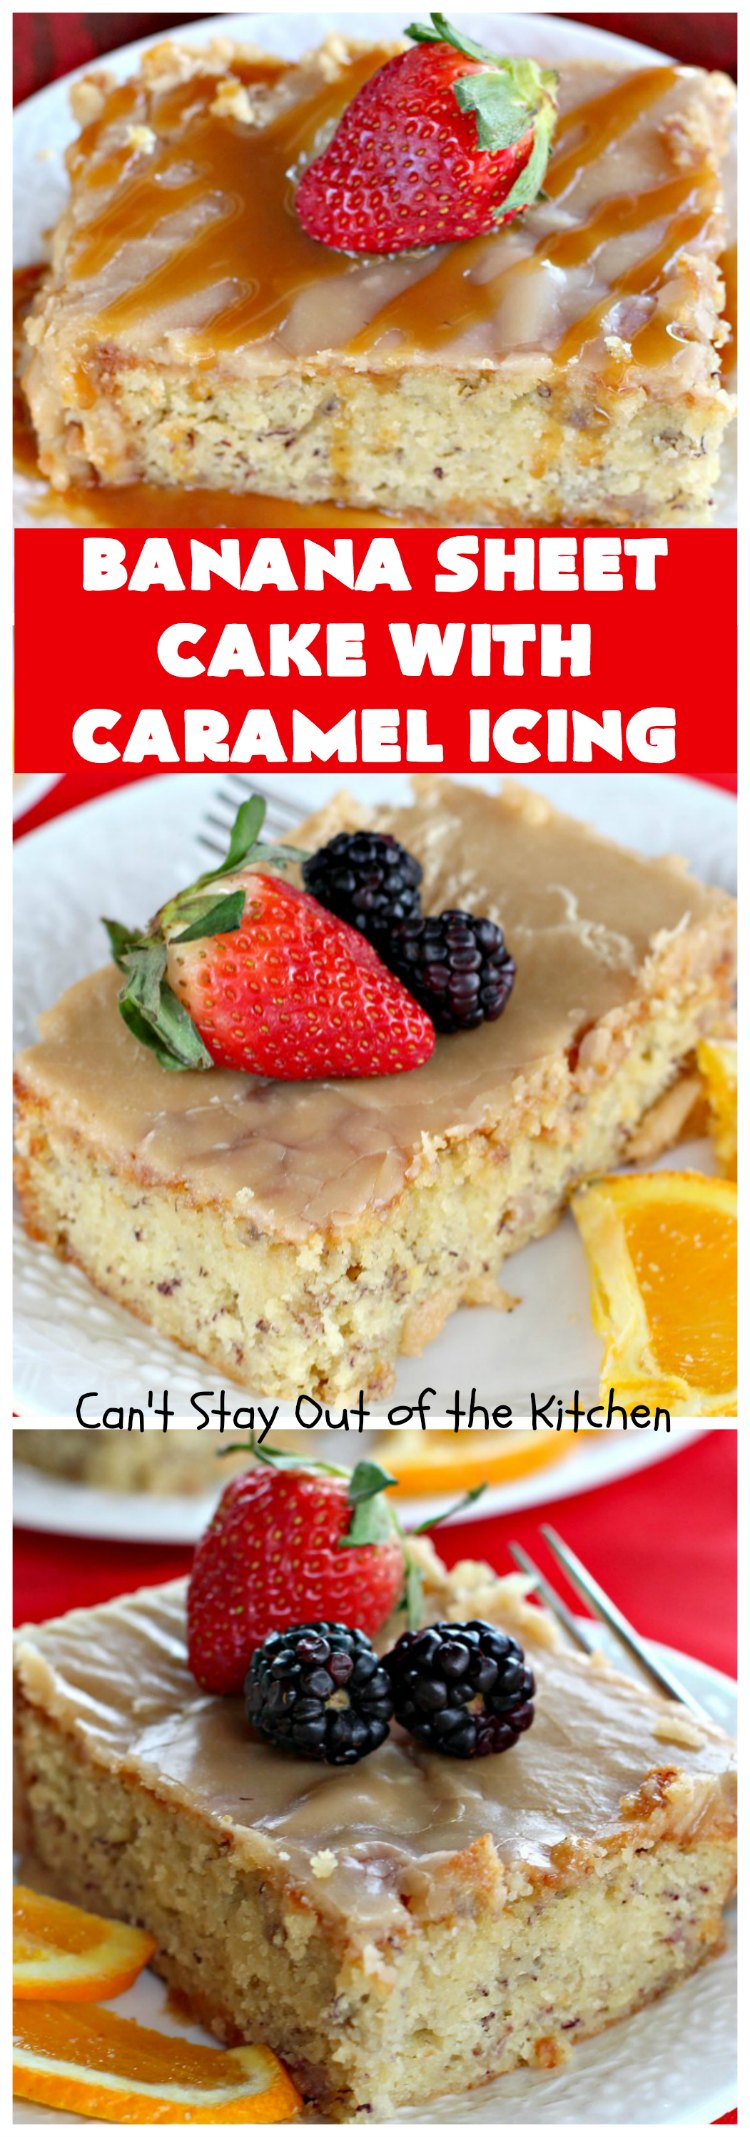 Banana Sheet Cake with Caramel Icing | Can't Stay Out of the Kitchen